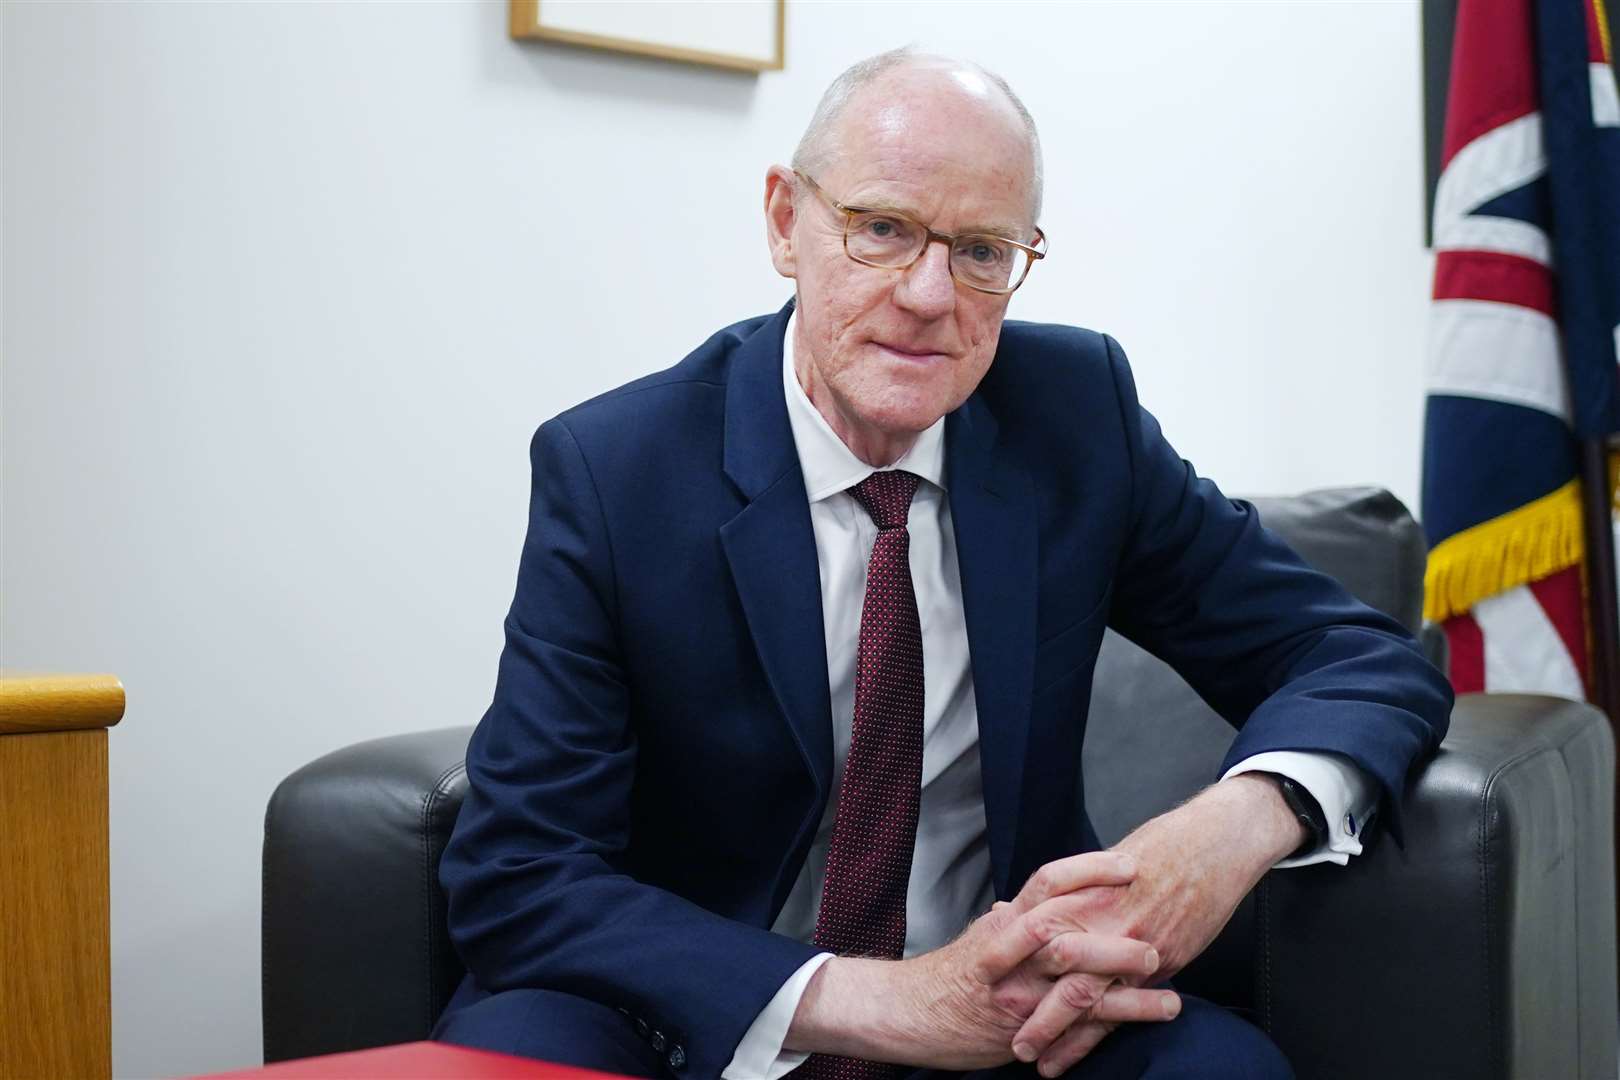 Education minister Nick Gibb said Nadine Dorries is not fulfilling commitments to constituents if she is not participating in Parliament (Victoria Jones/PA)